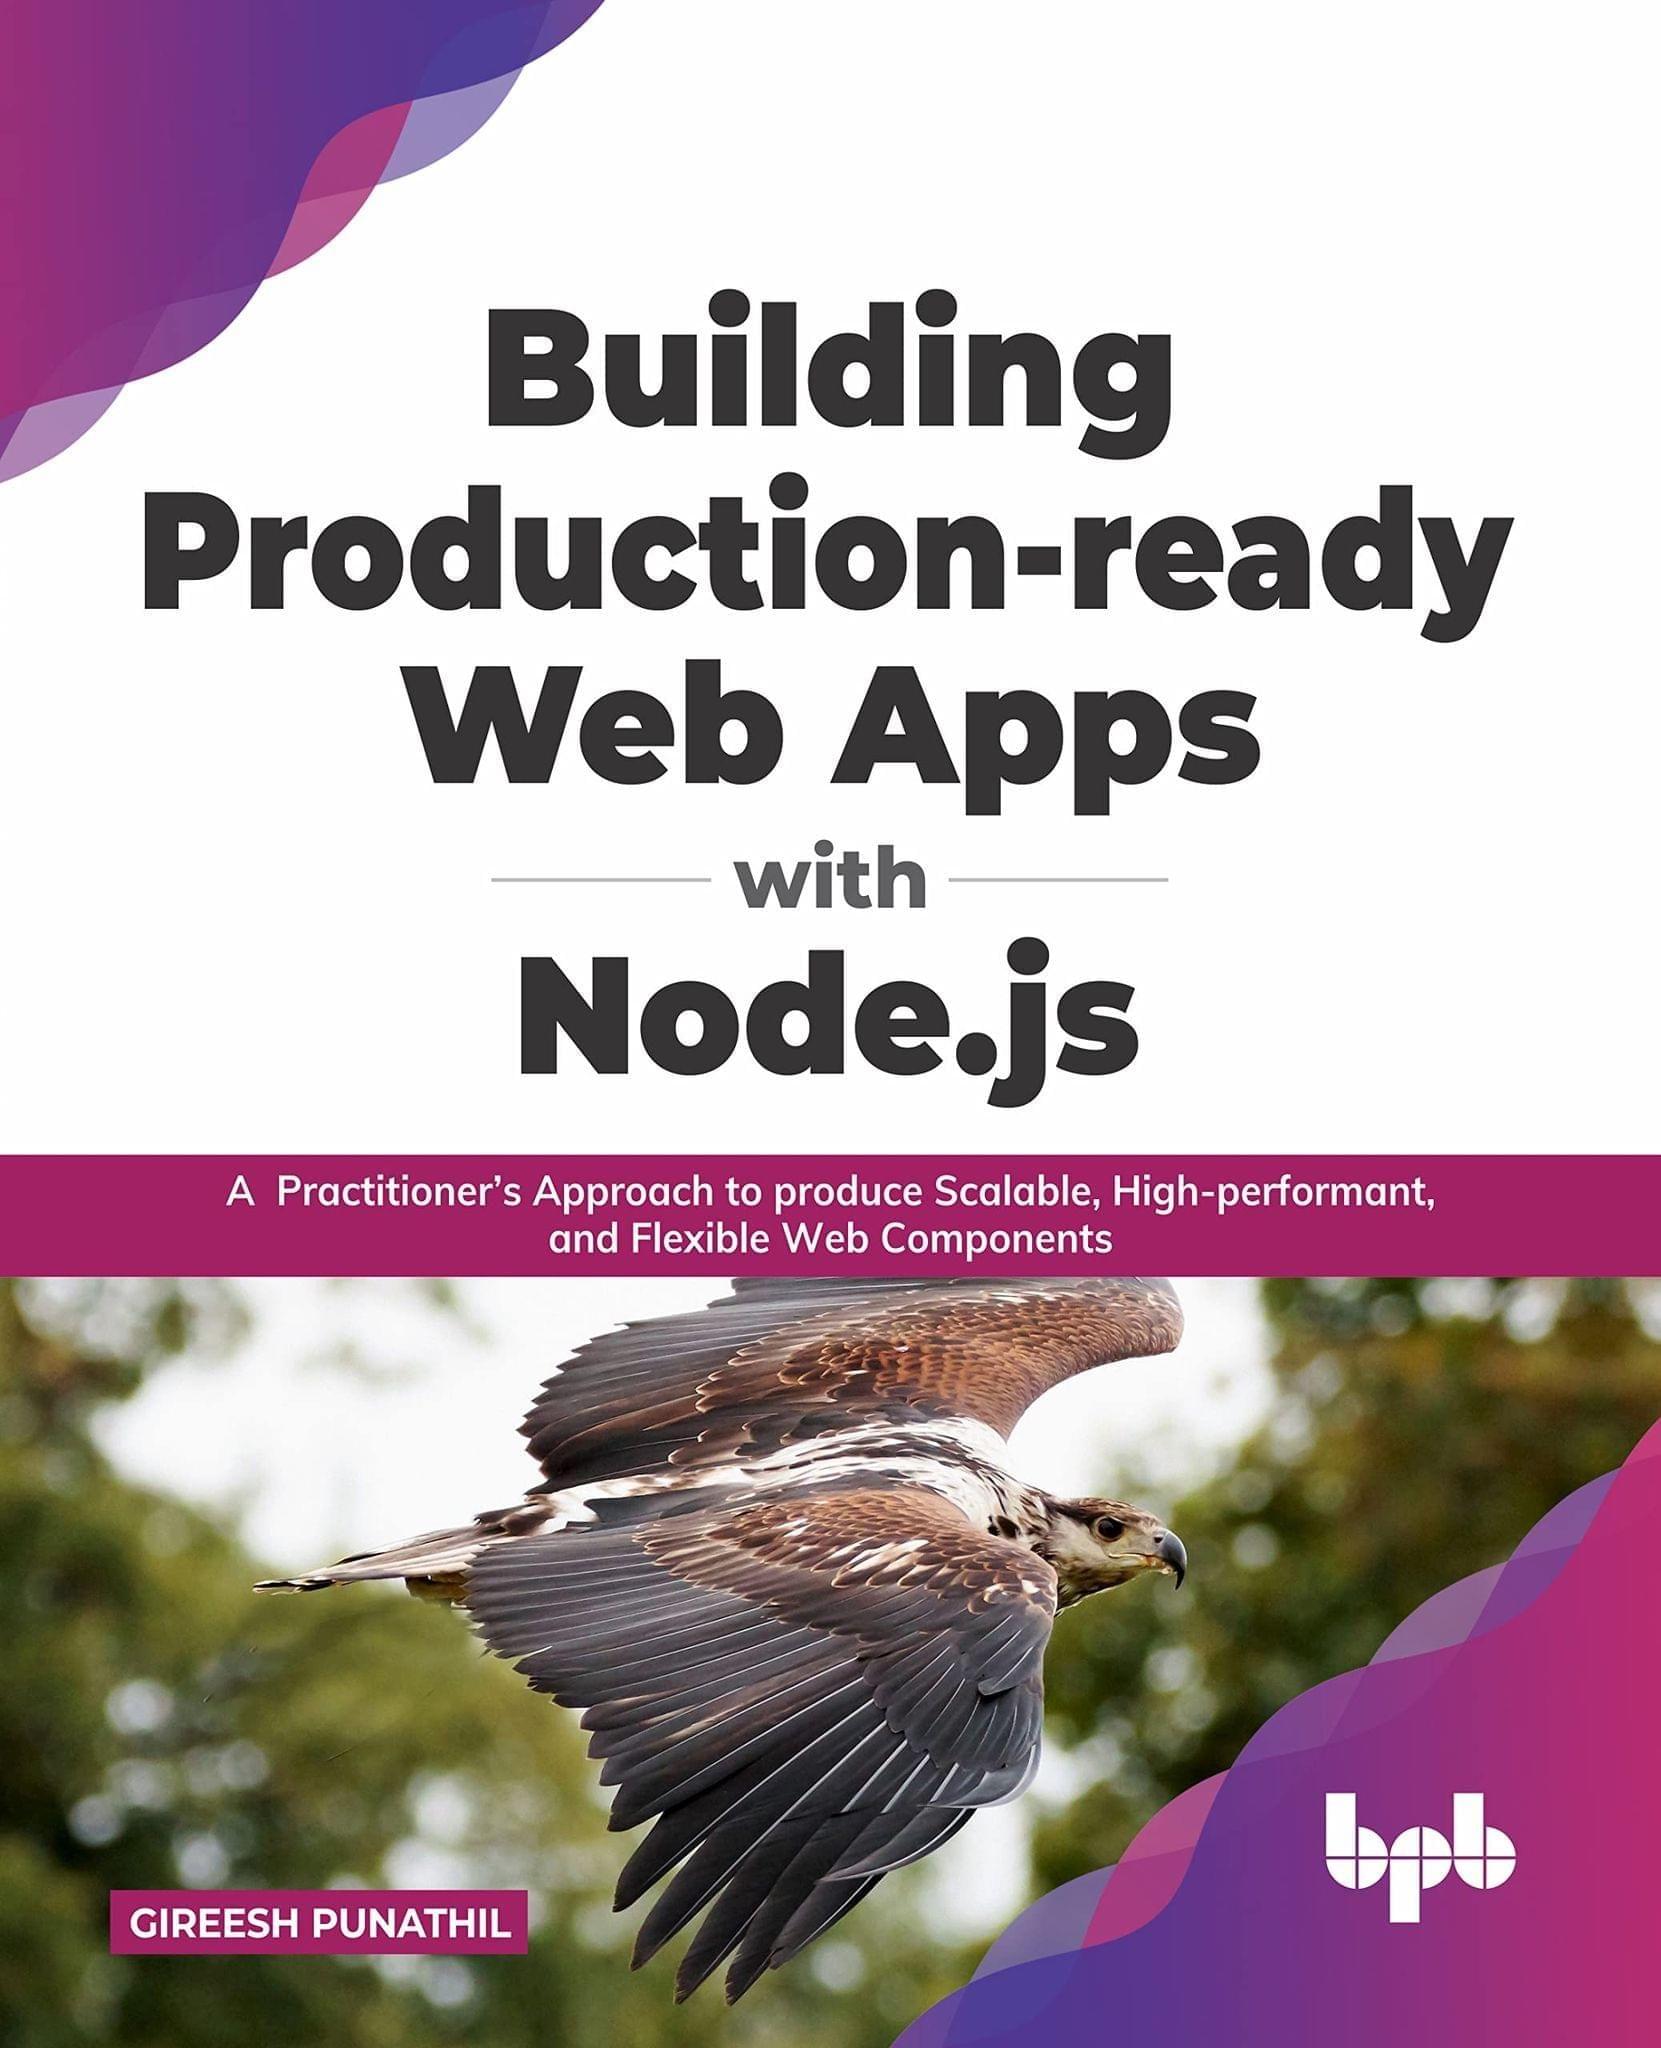 Building Production-ready Web Apps with Node.js: A Practitioner?s Approach to produce Scalable, High-performant, and Flexible Web Components [Paperback] Gireesh Punathil